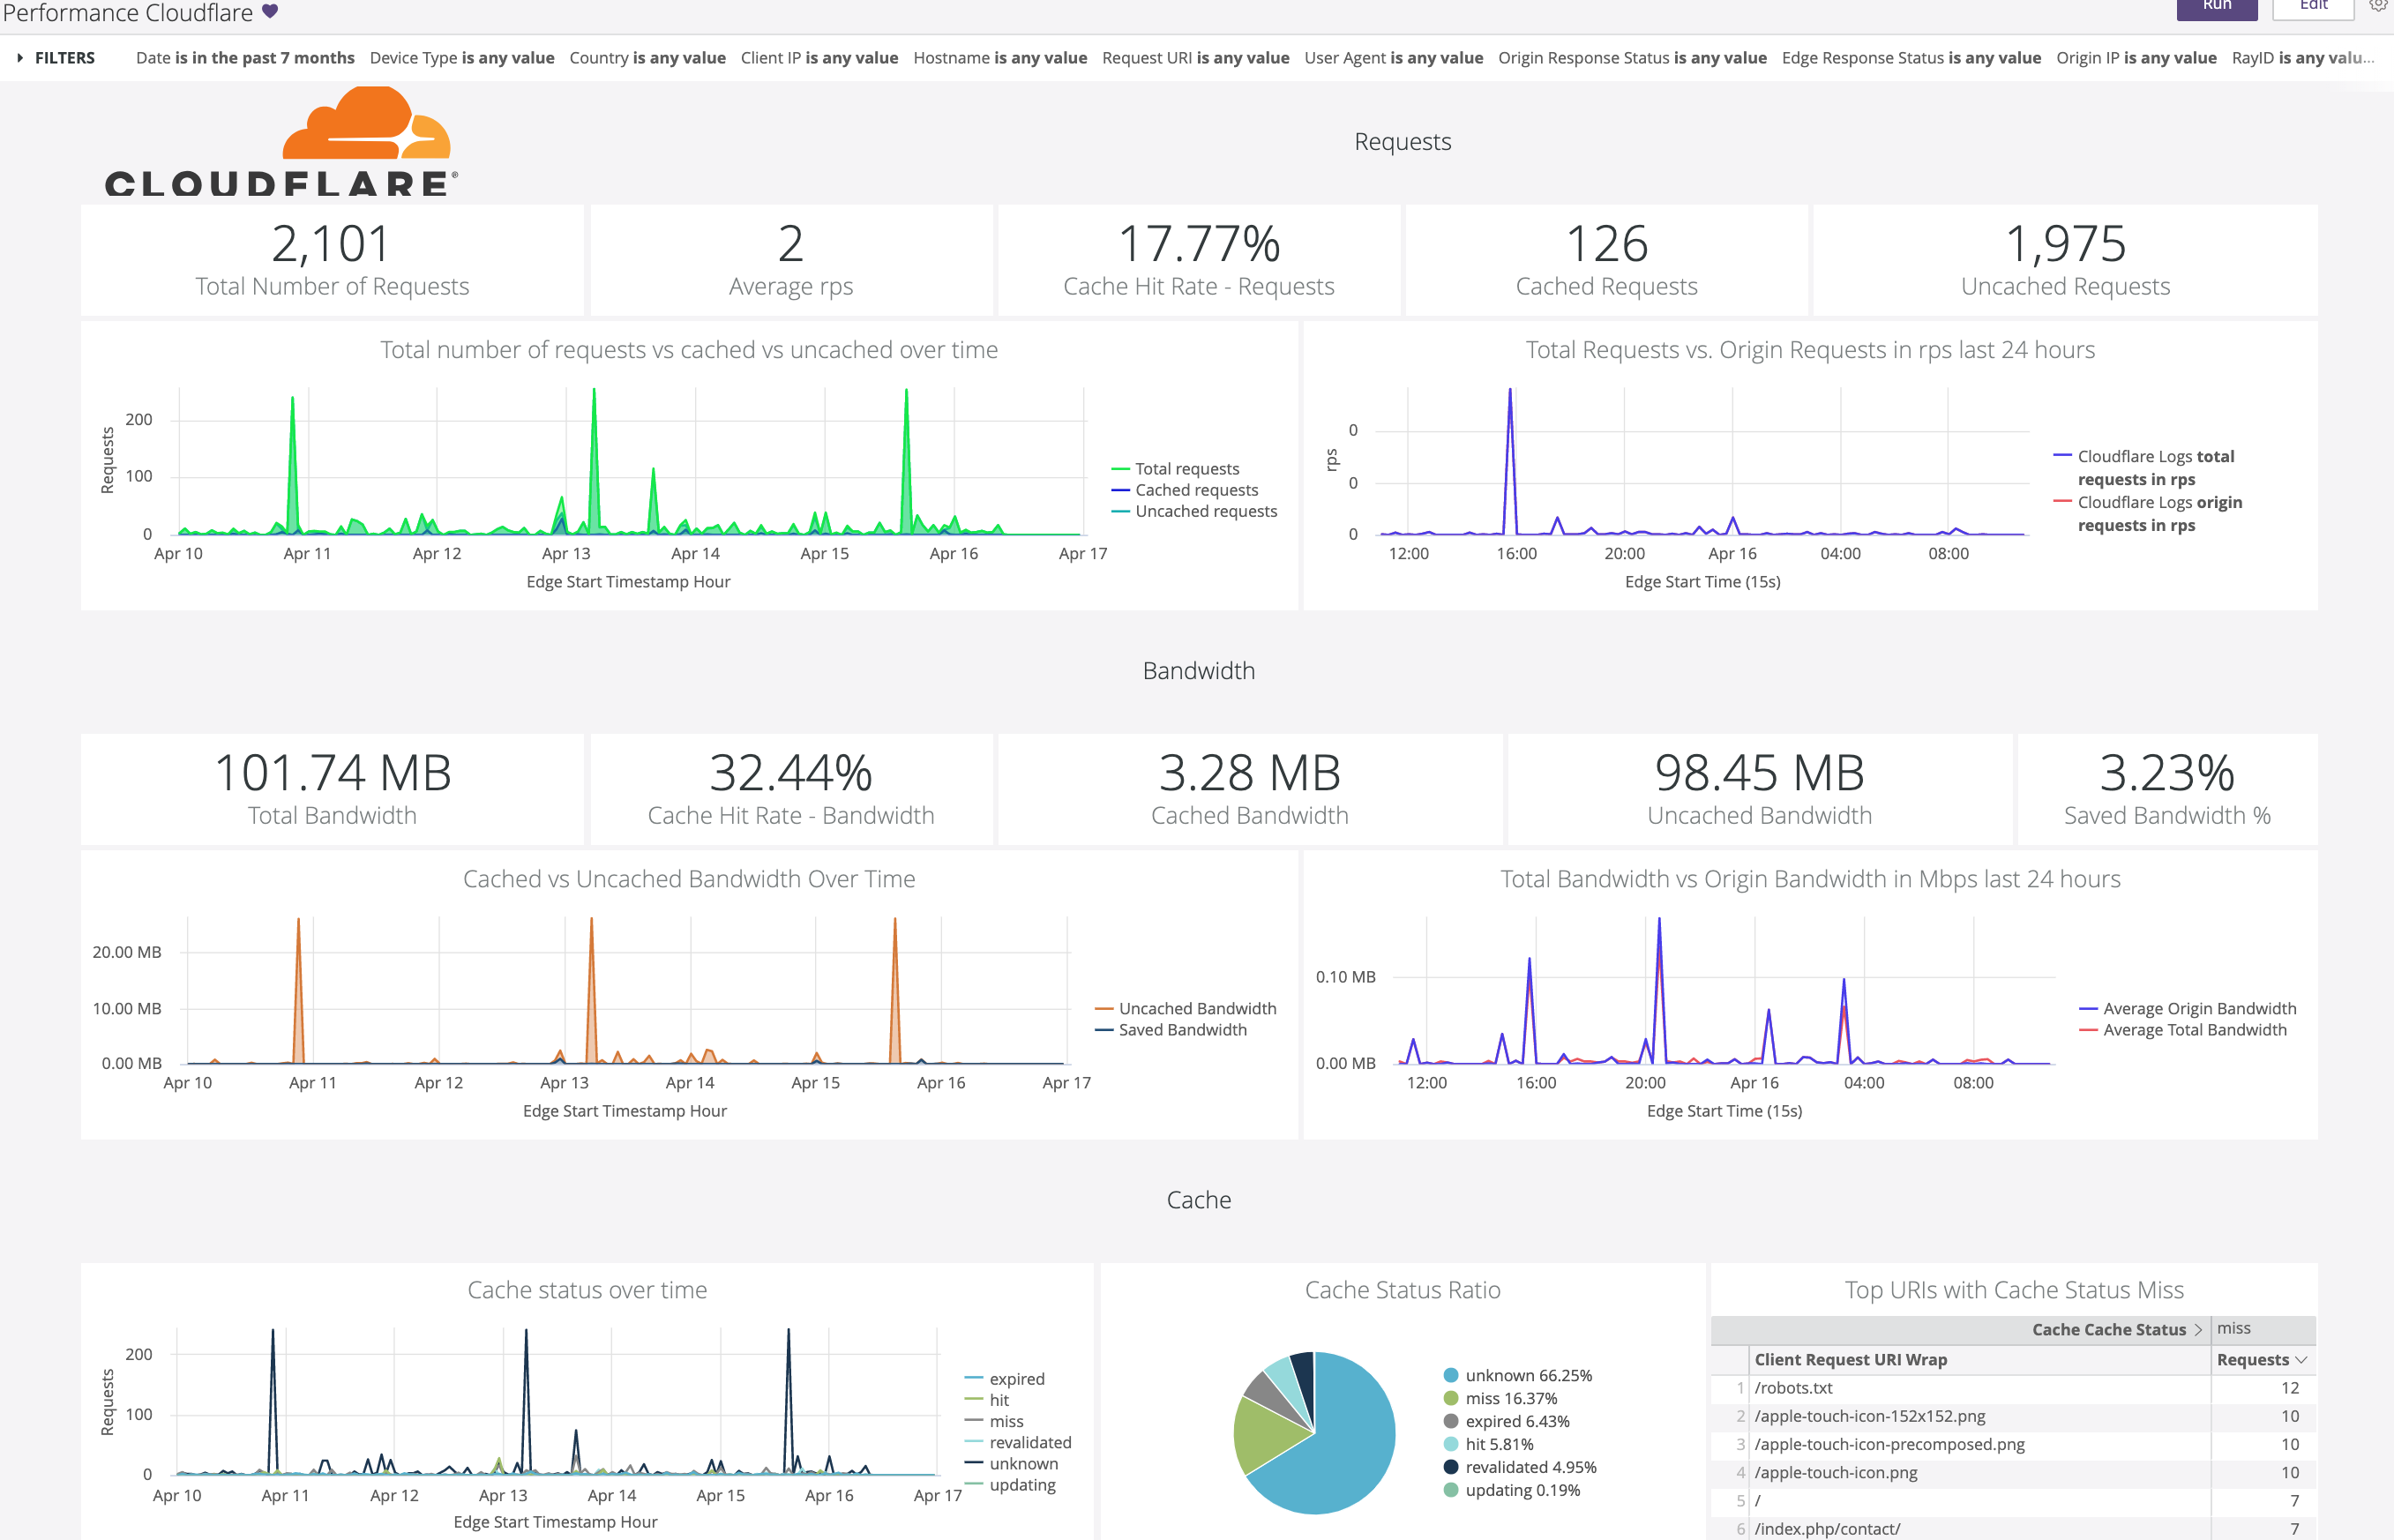 Looker dashboard highlighting Cloudflare metrics including Requests, Bandwidth, and Cache